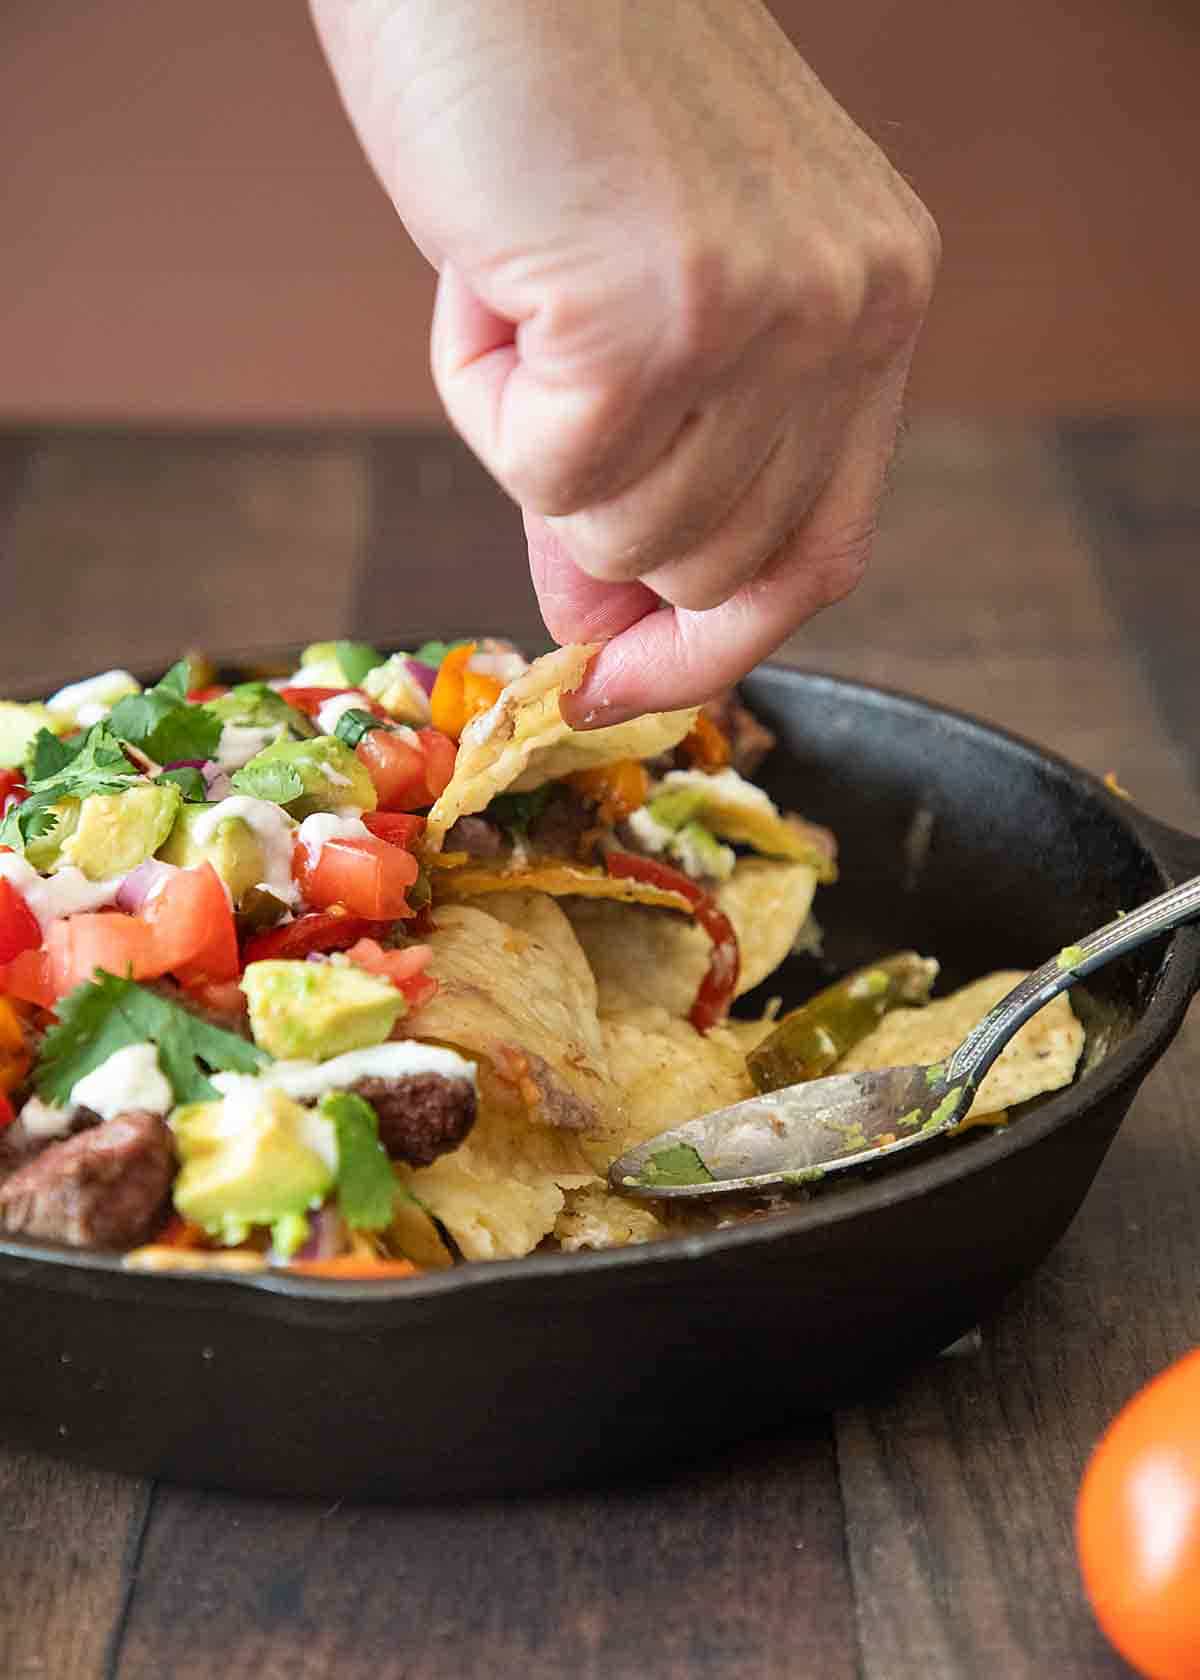 Steak tacos in a pan with a hand grabbing one